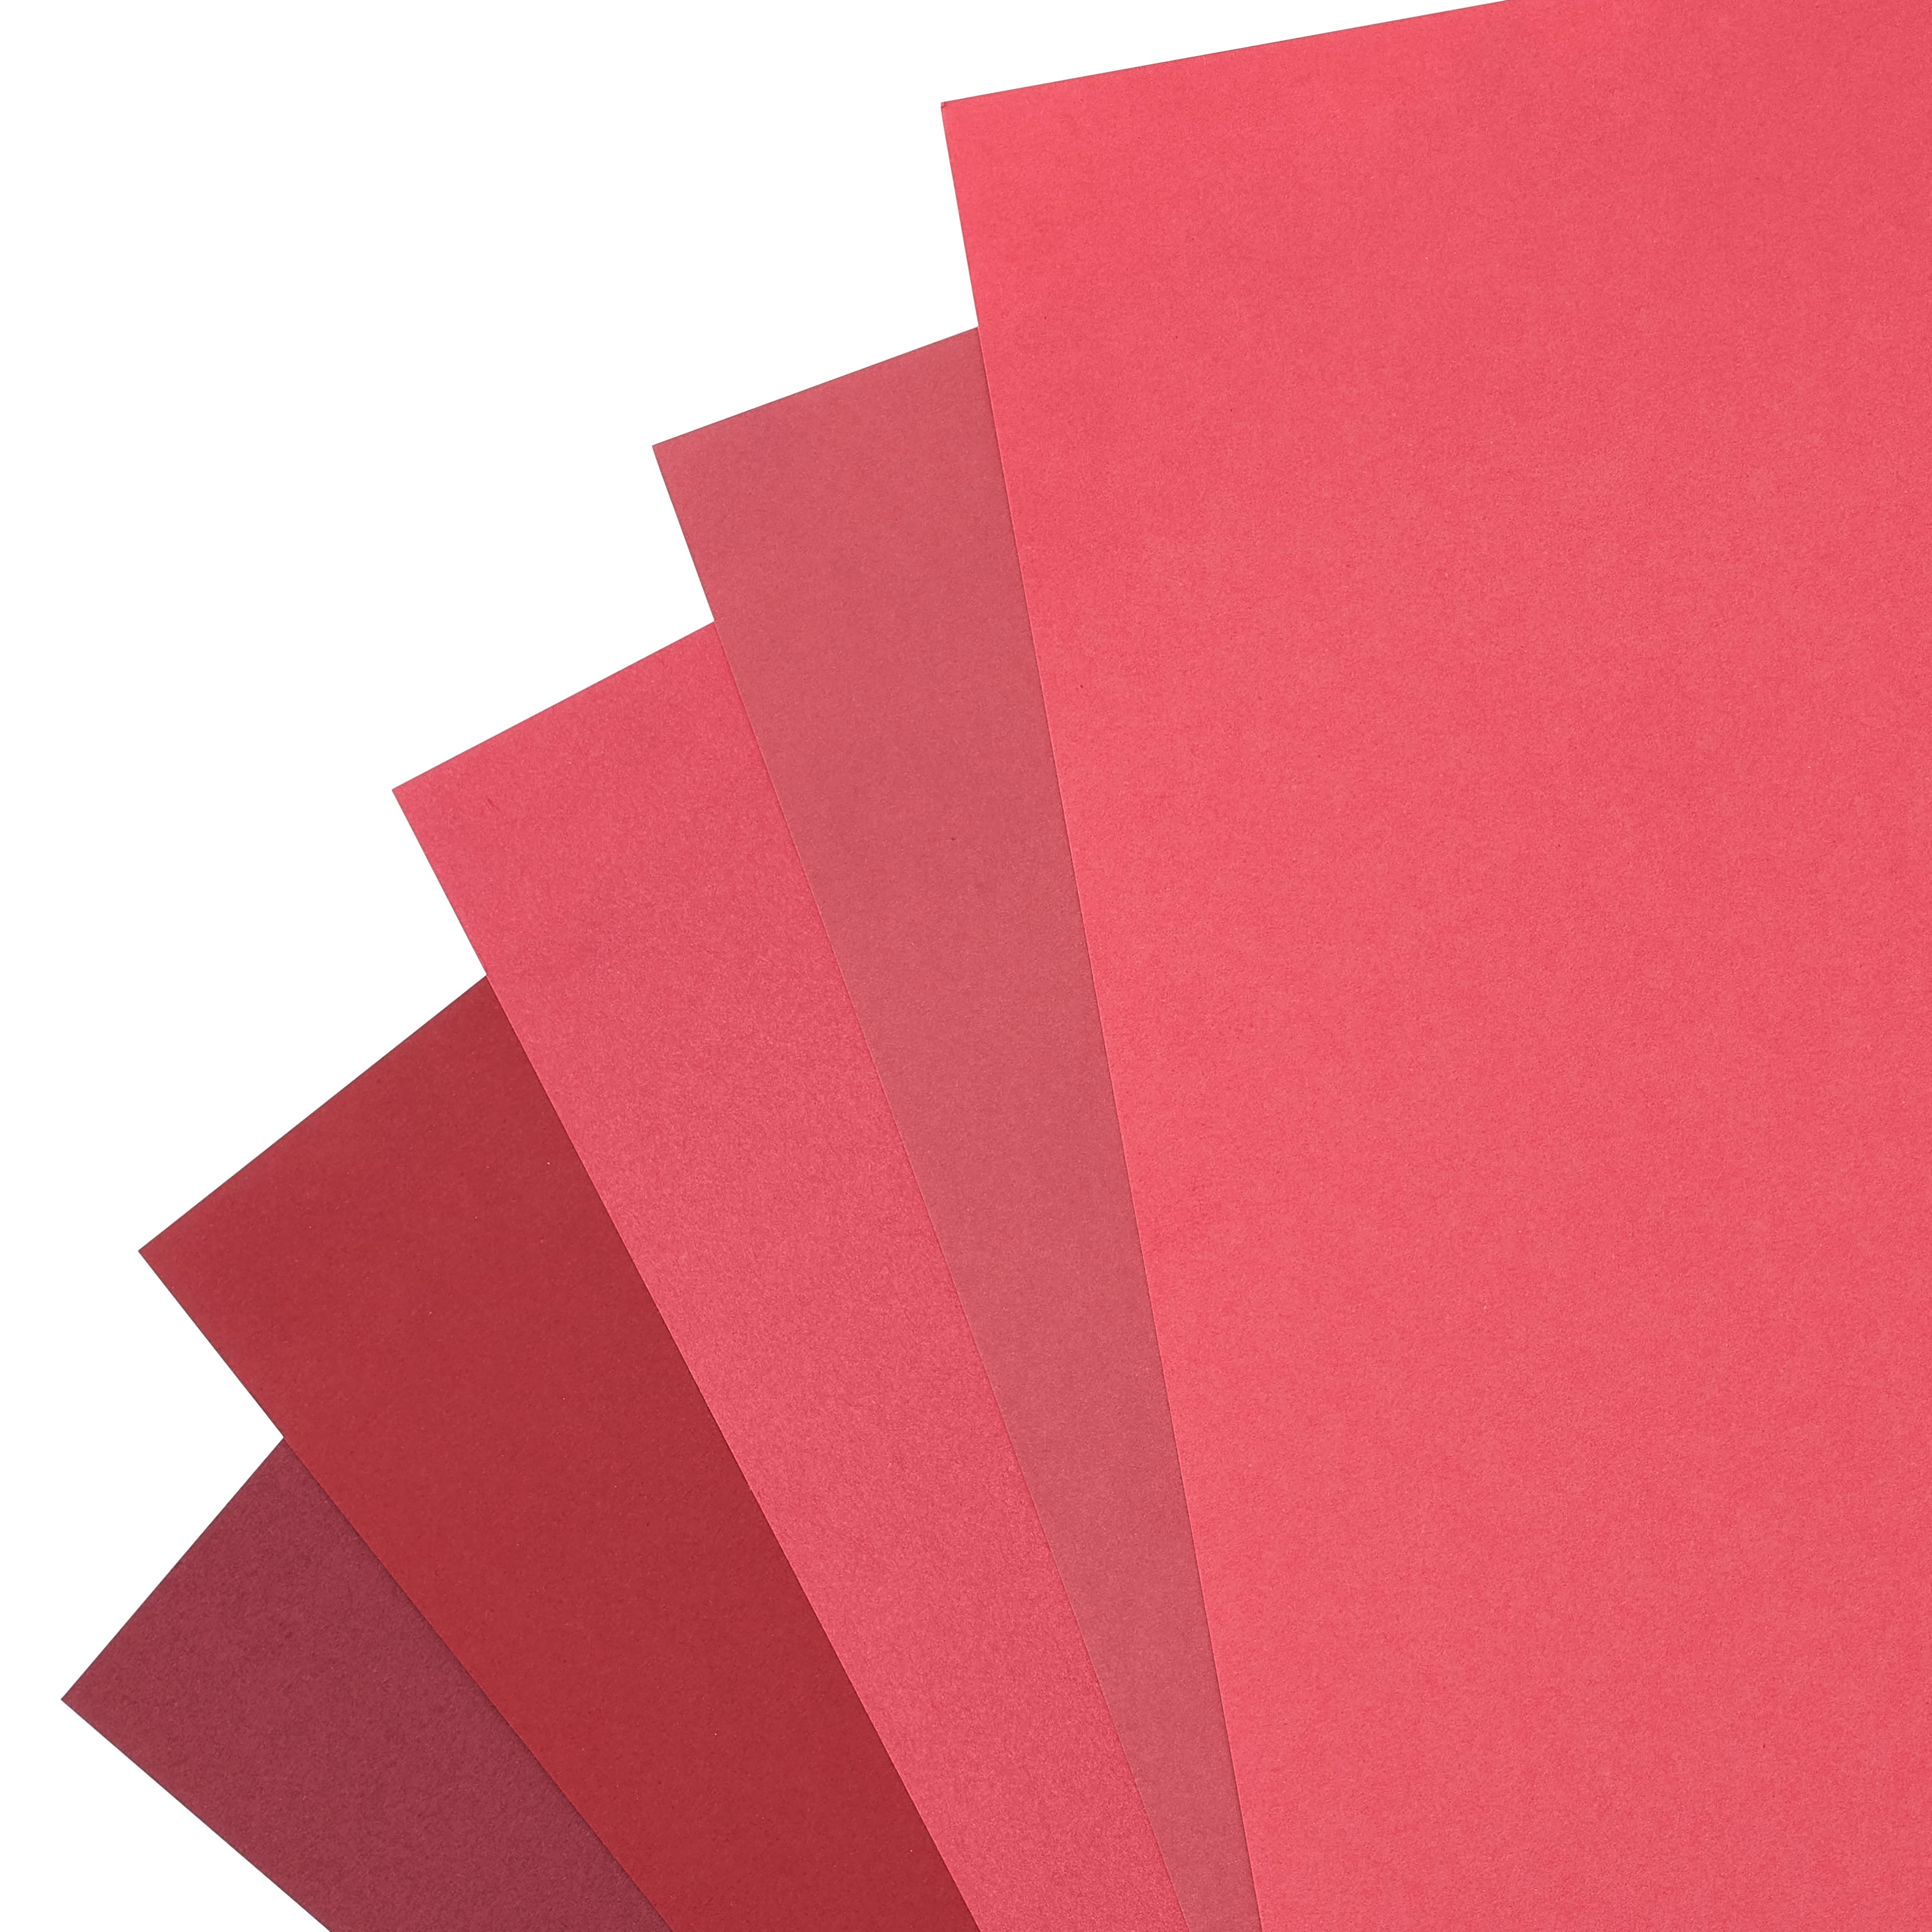 20 Sheets Red Cardstock 8.5 x 11 250gsm Thick Red cardstock Paper for DIY  Art